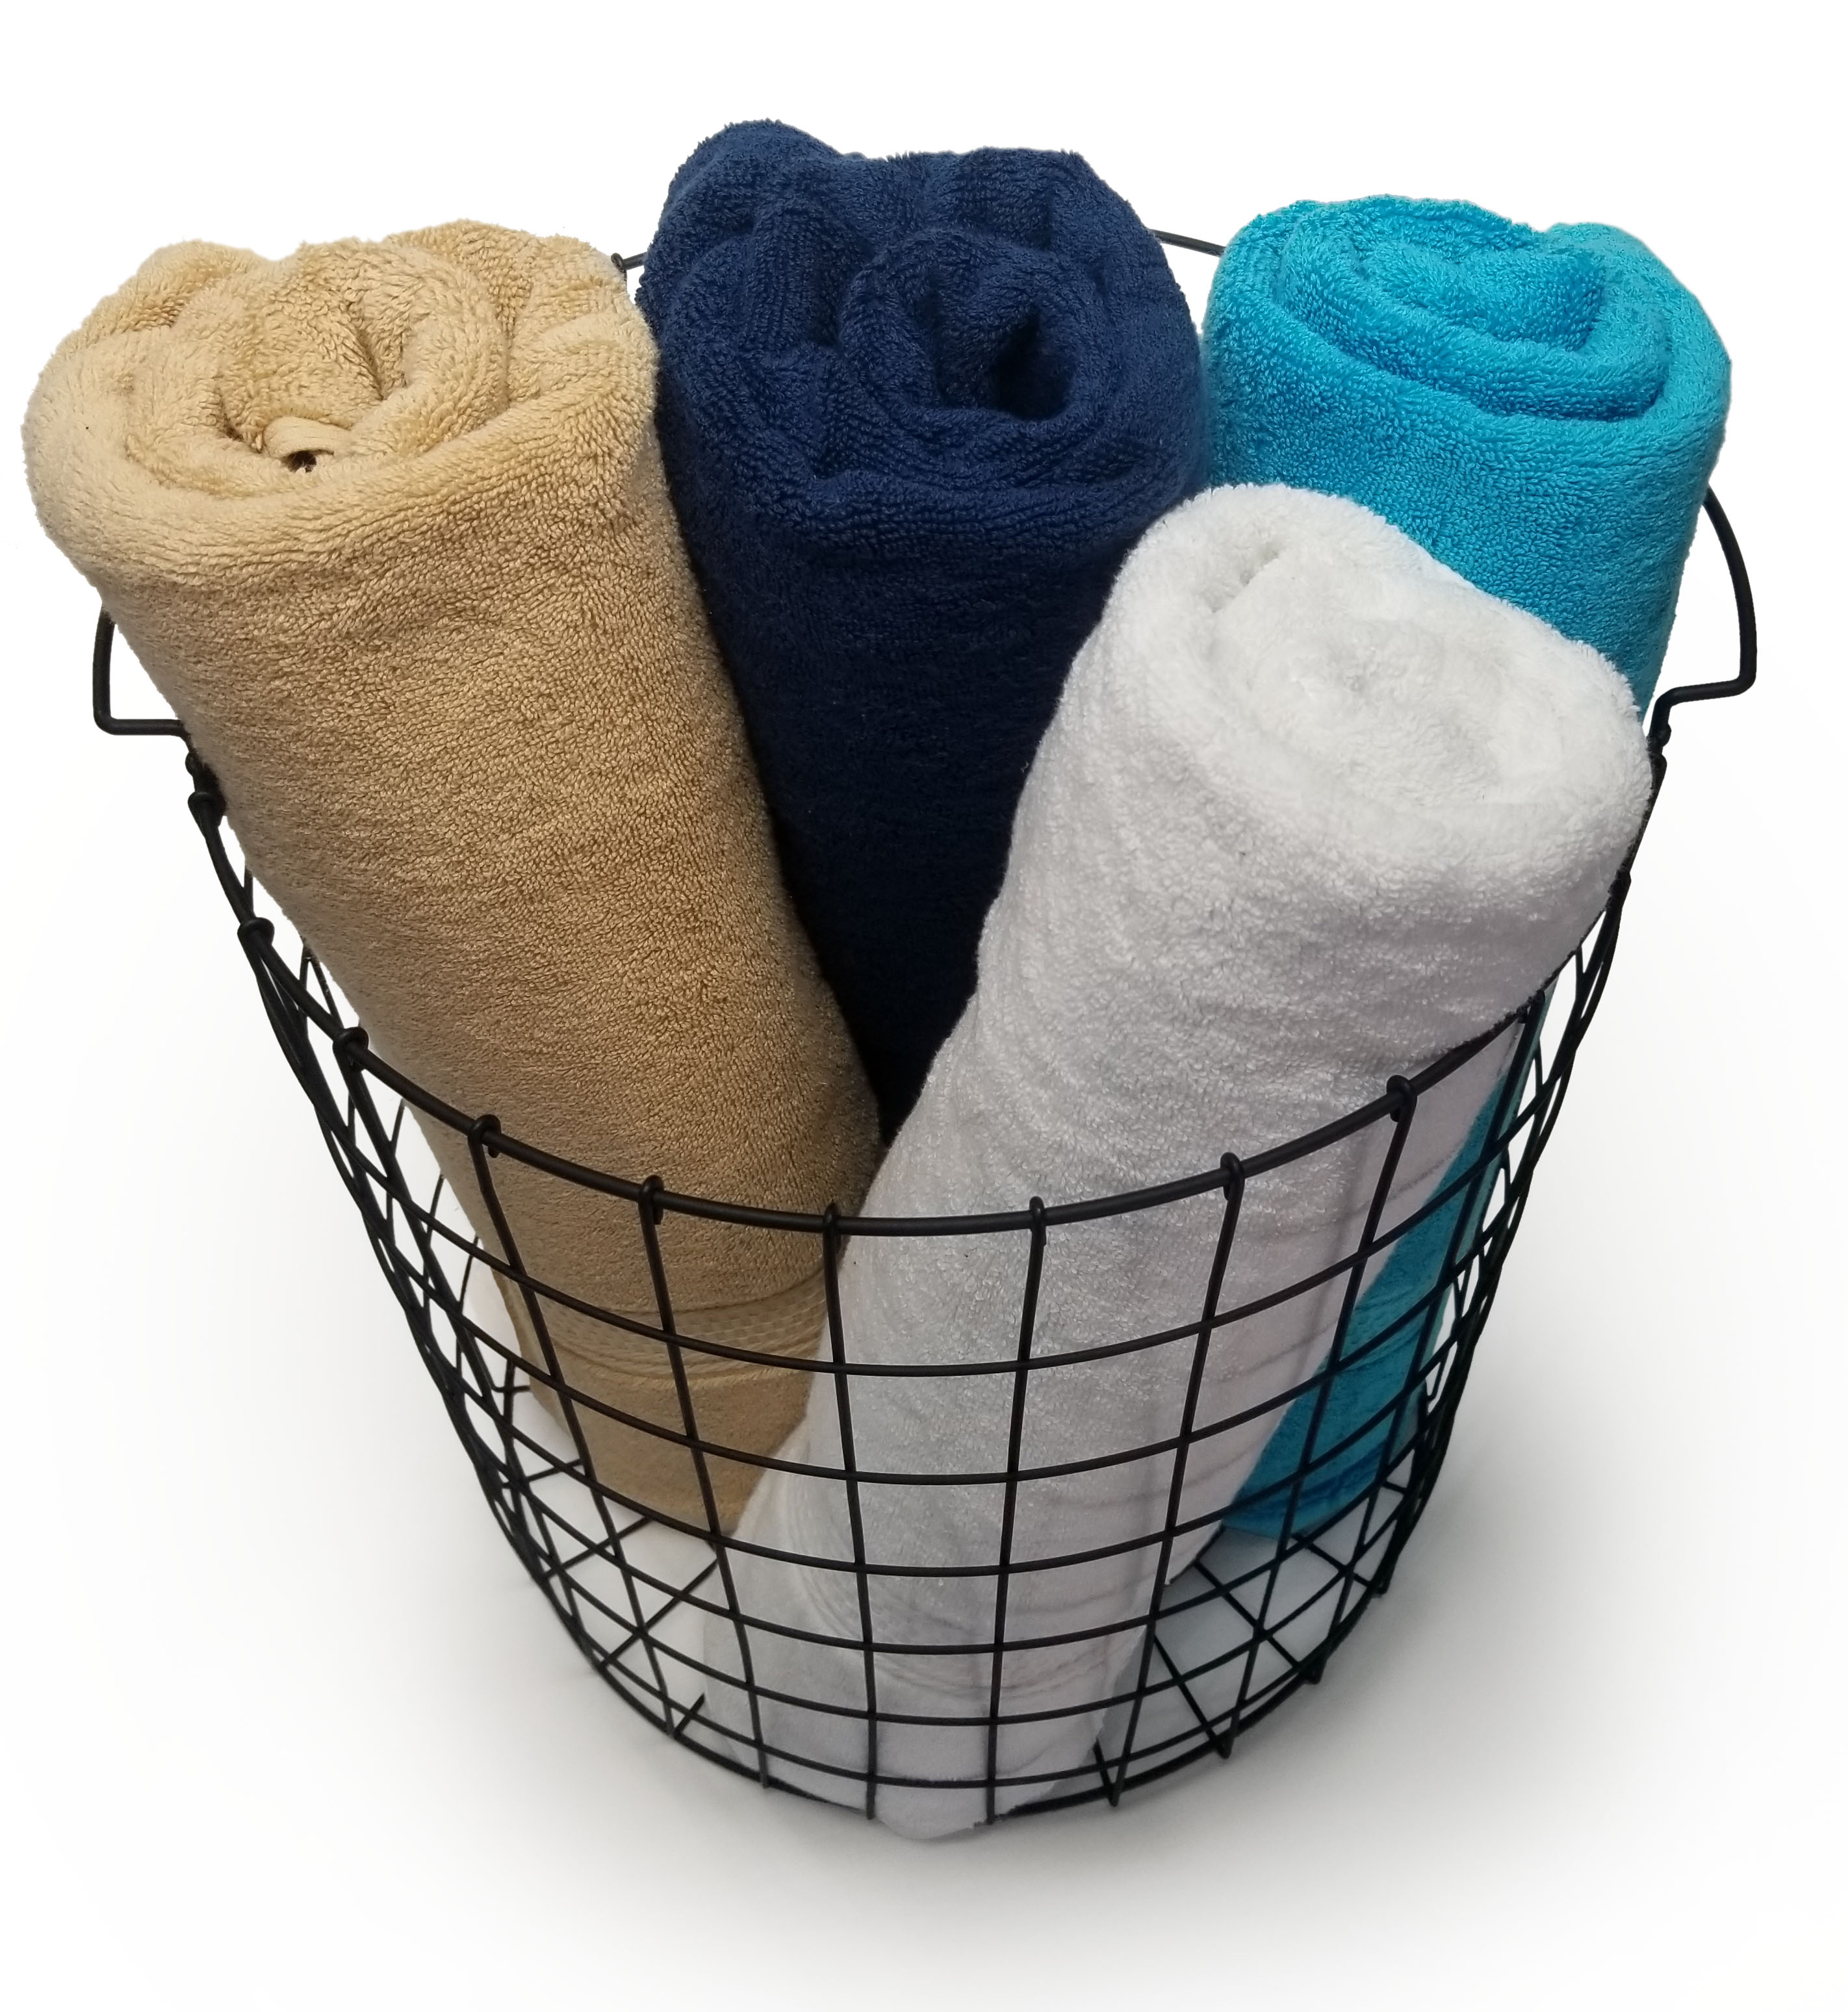 SHIPPING INCLUDED  24x48 Bath Towels by Royal Comfort 10.8 Lbs/Dz  Woven   RING SPUN COTTON 